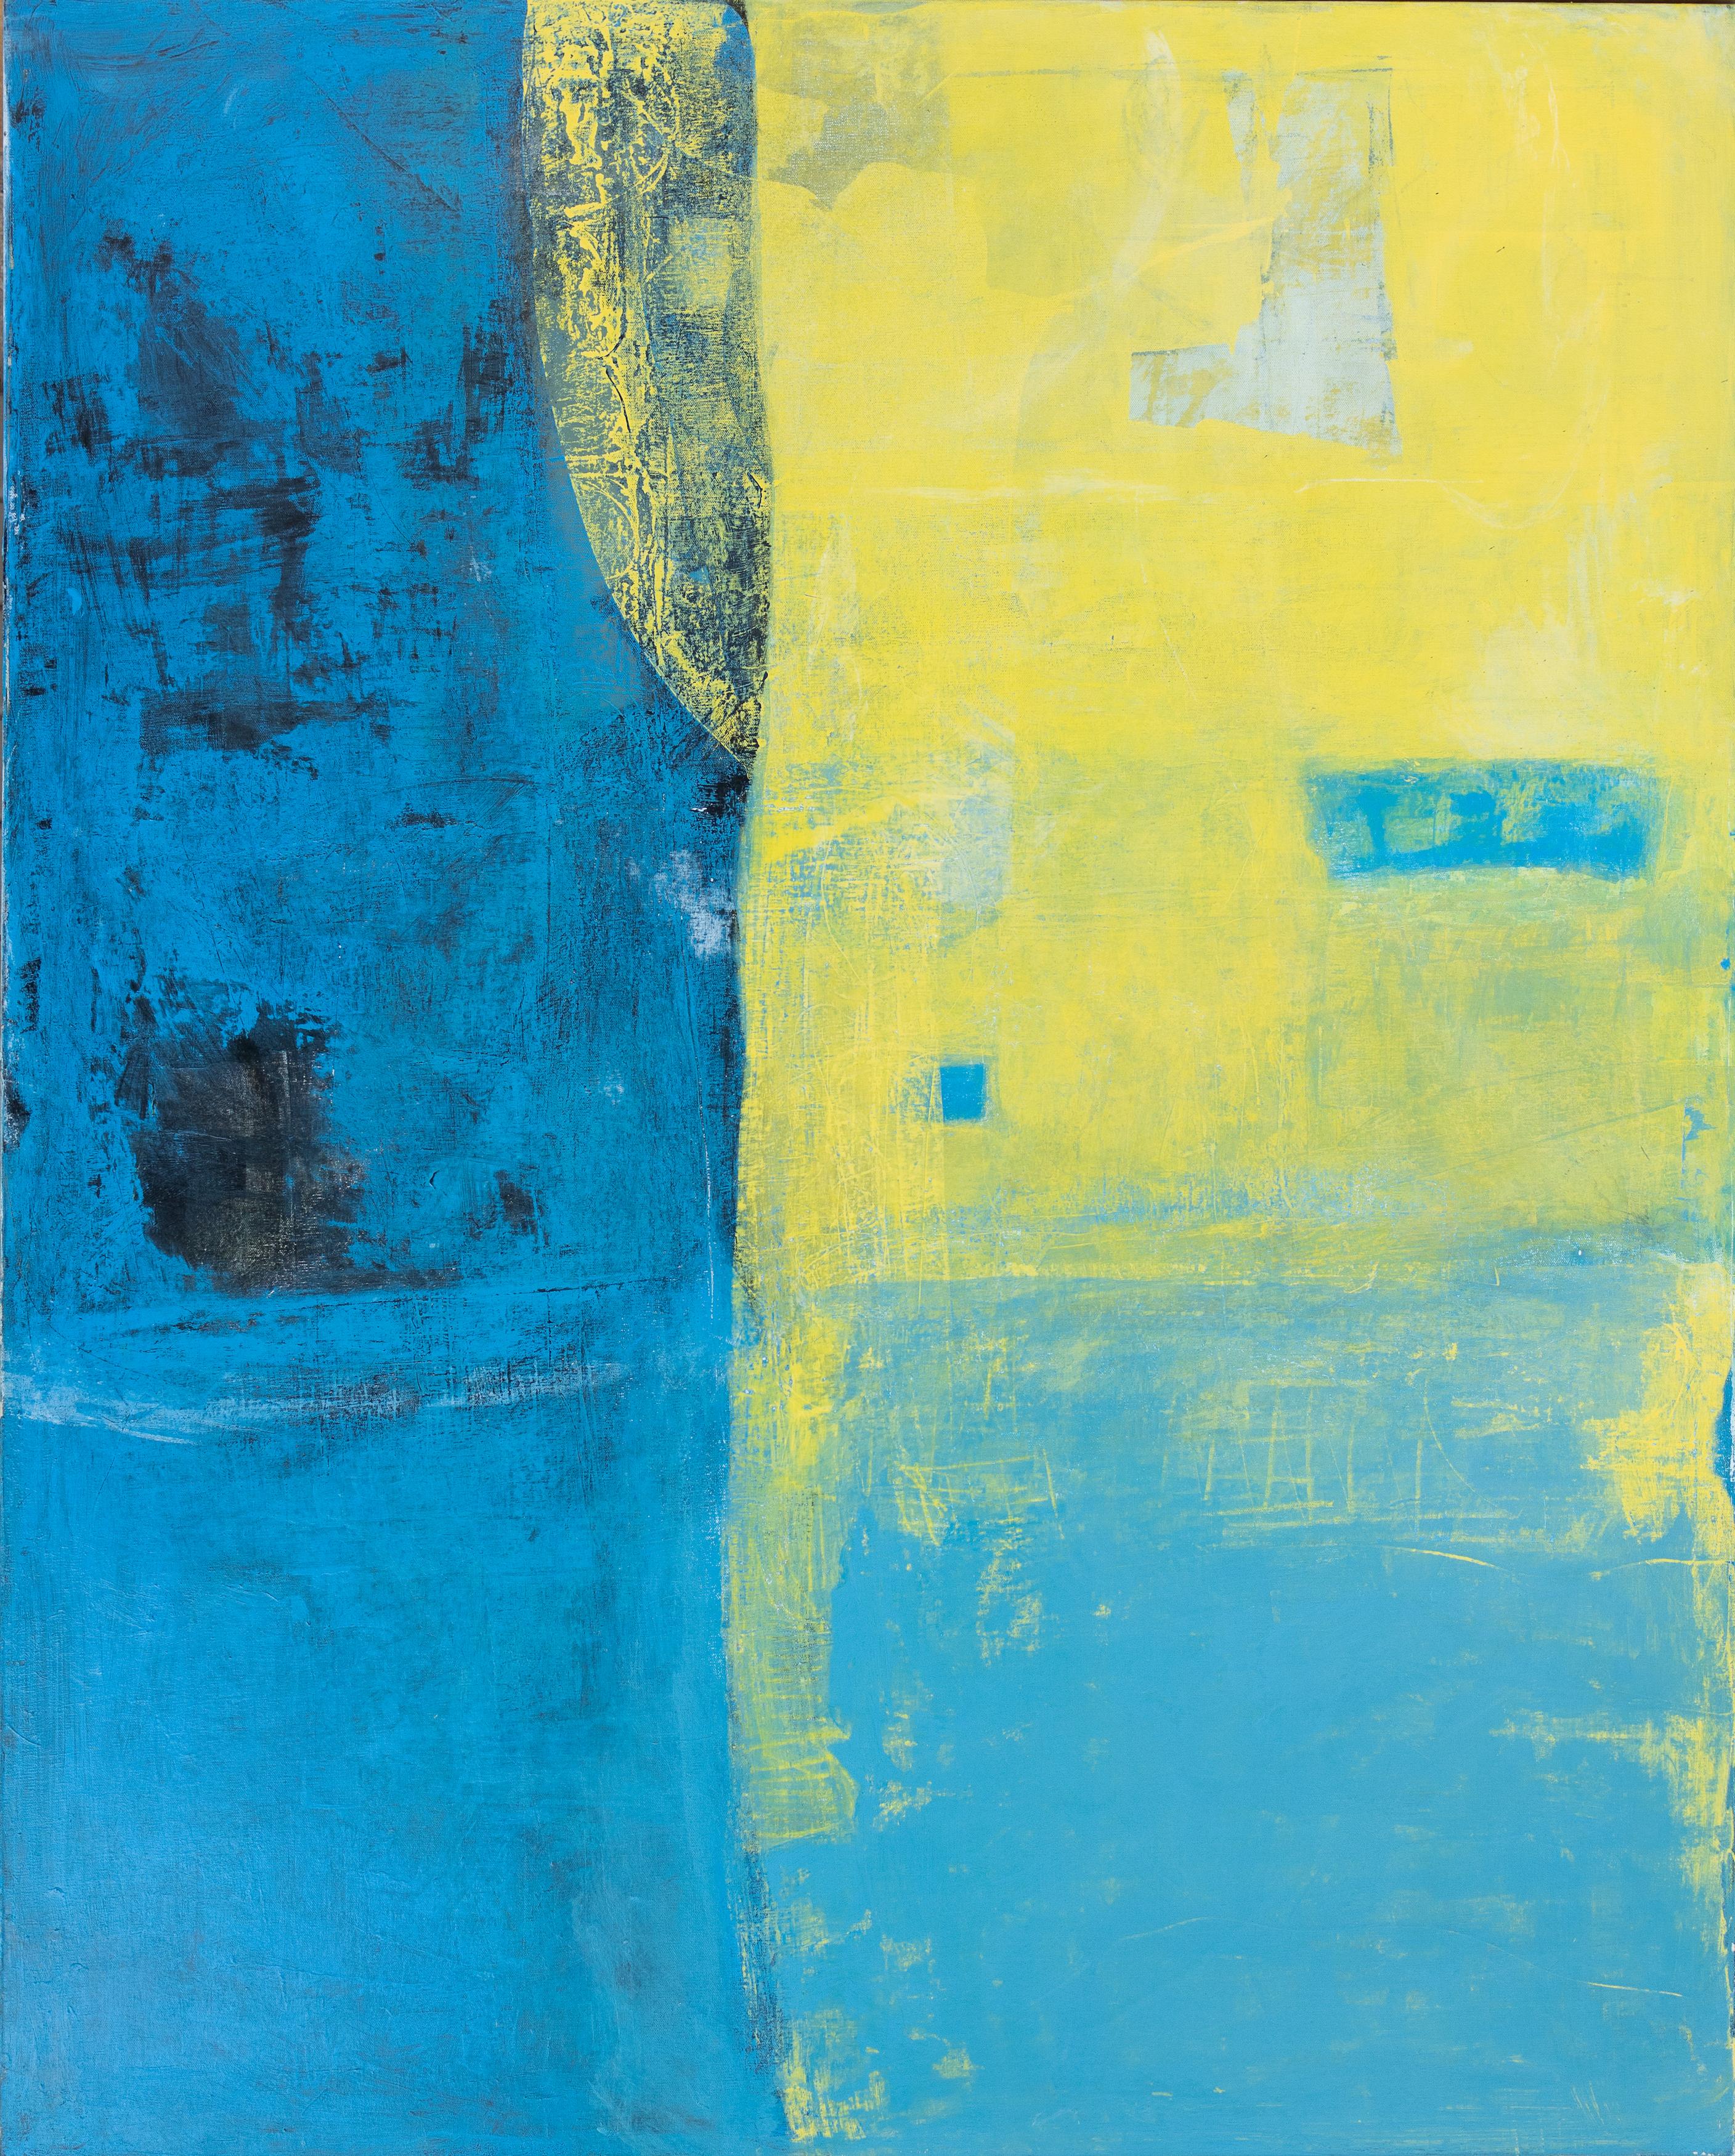 Tom Reno Abstract Painting - "Blue and Yellow Abstract" Large Gestural Color Field Painting